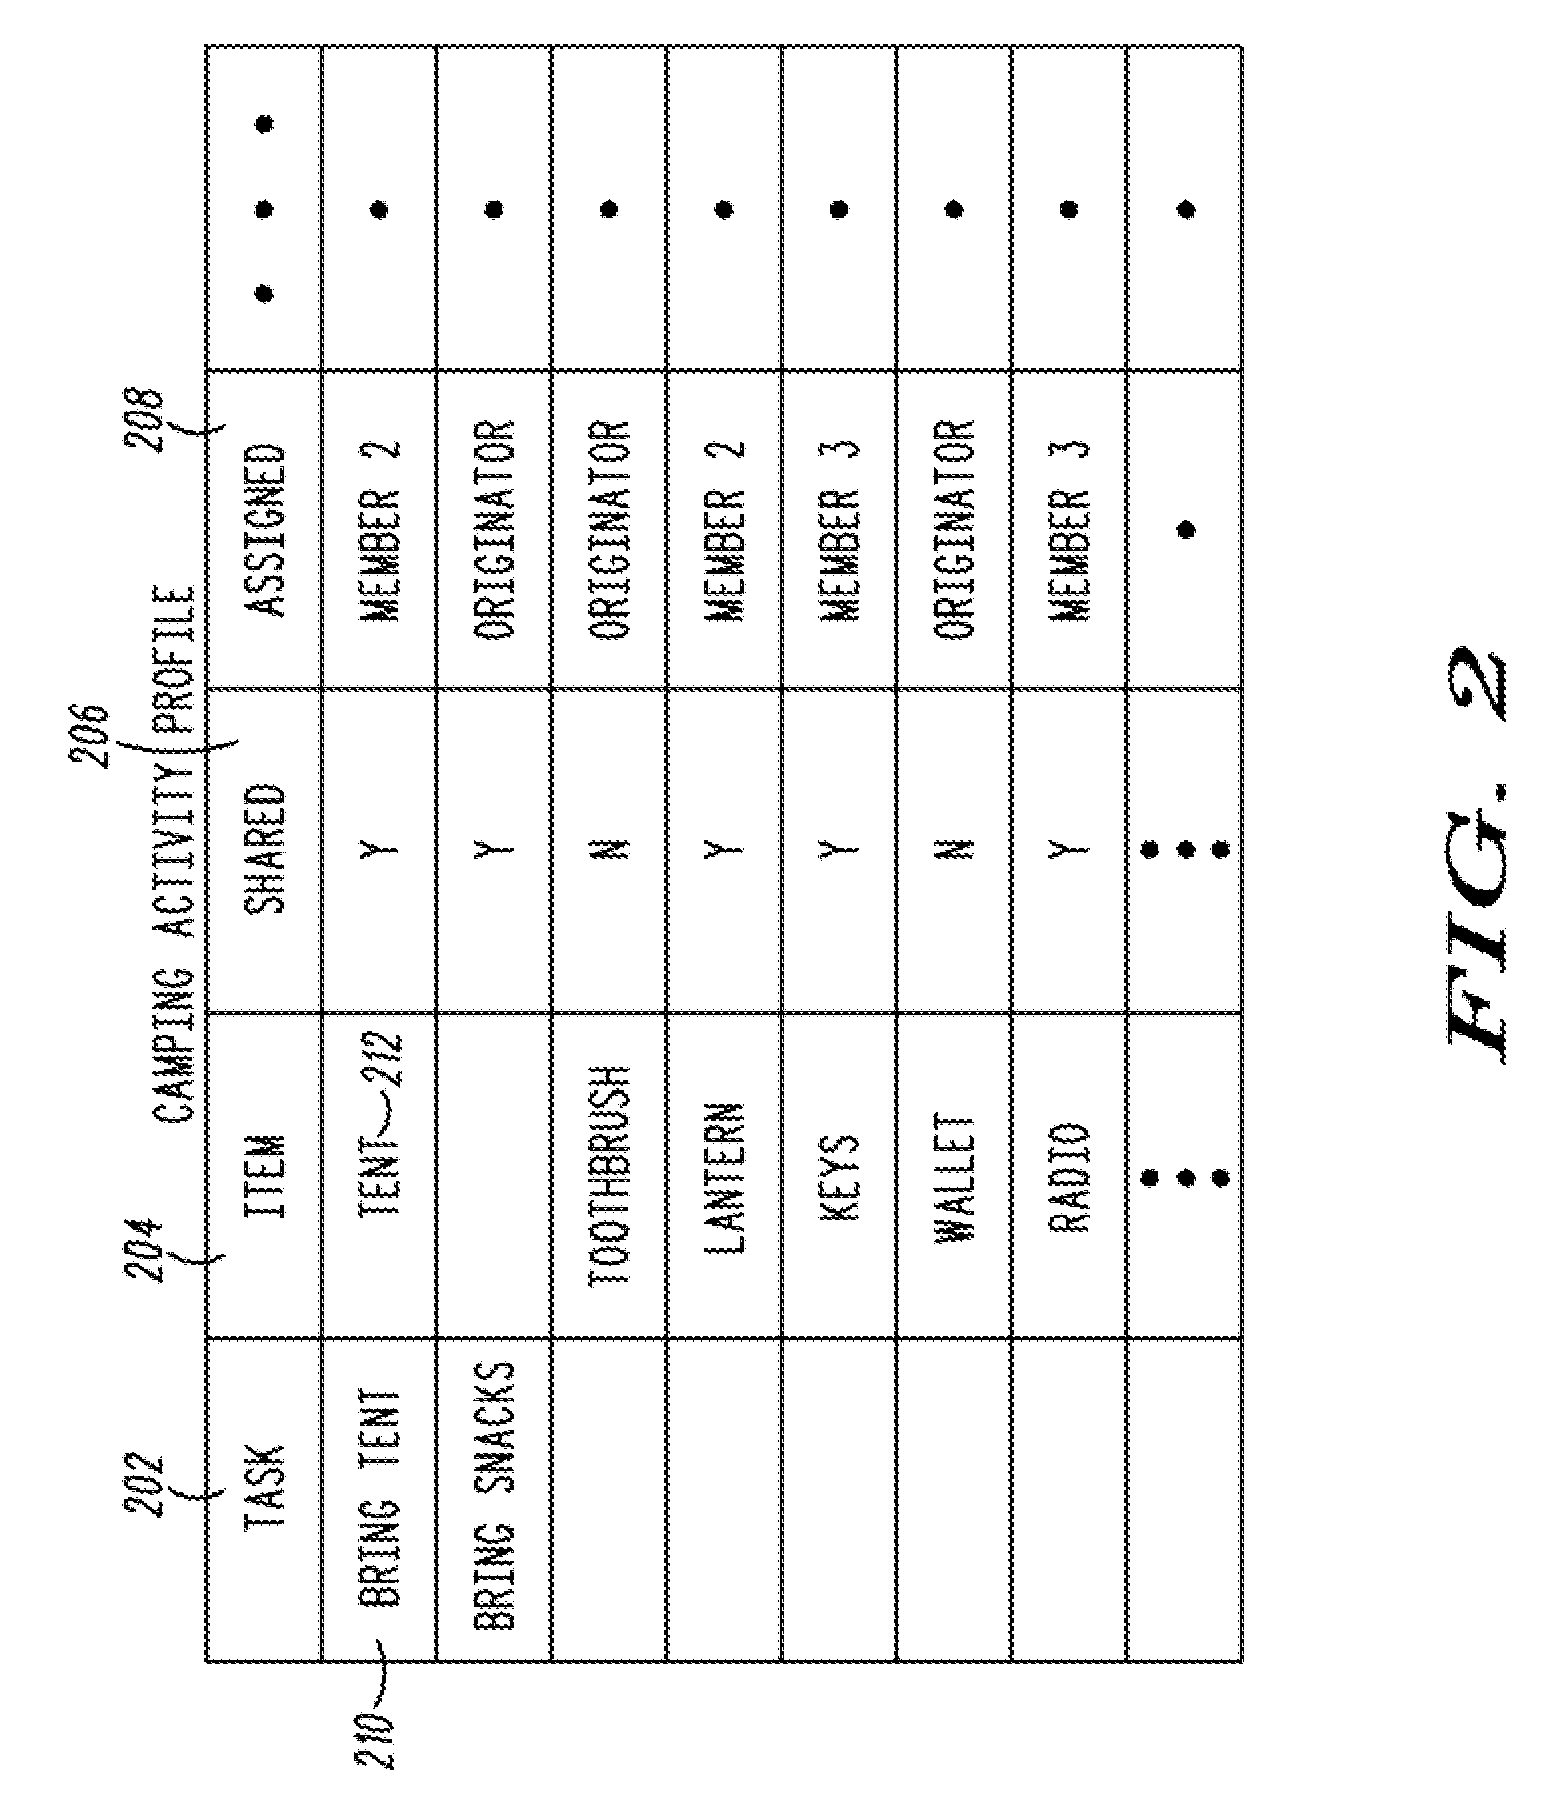 Monitoring for radio frequency enabled items based on shared group activity profiles